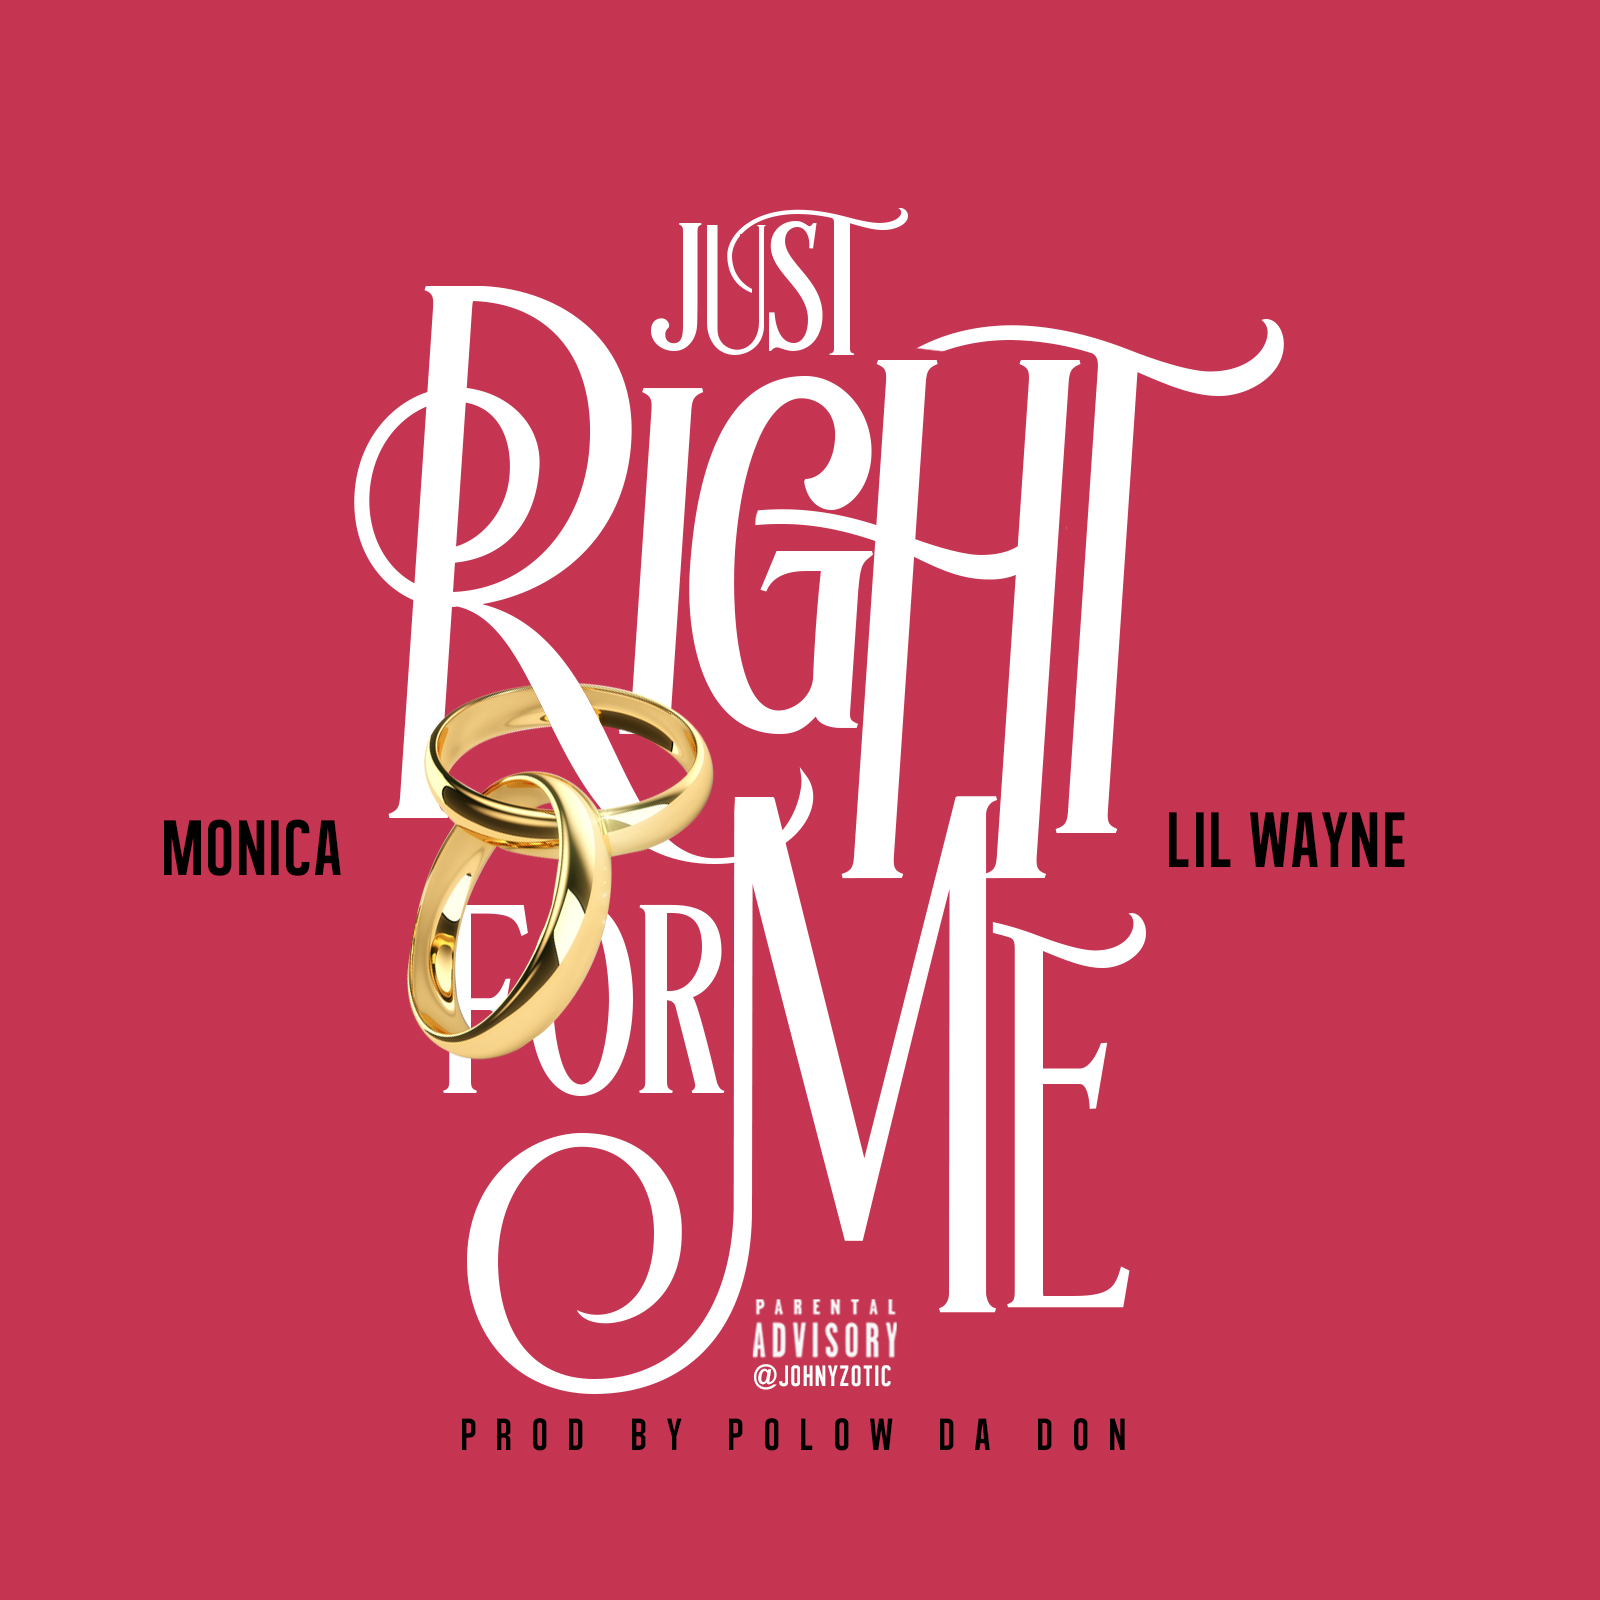 Monica ft. Lil Wayne – “Just Right For Me” (L.A. Leakers WORLD PREMIER) (Audio)